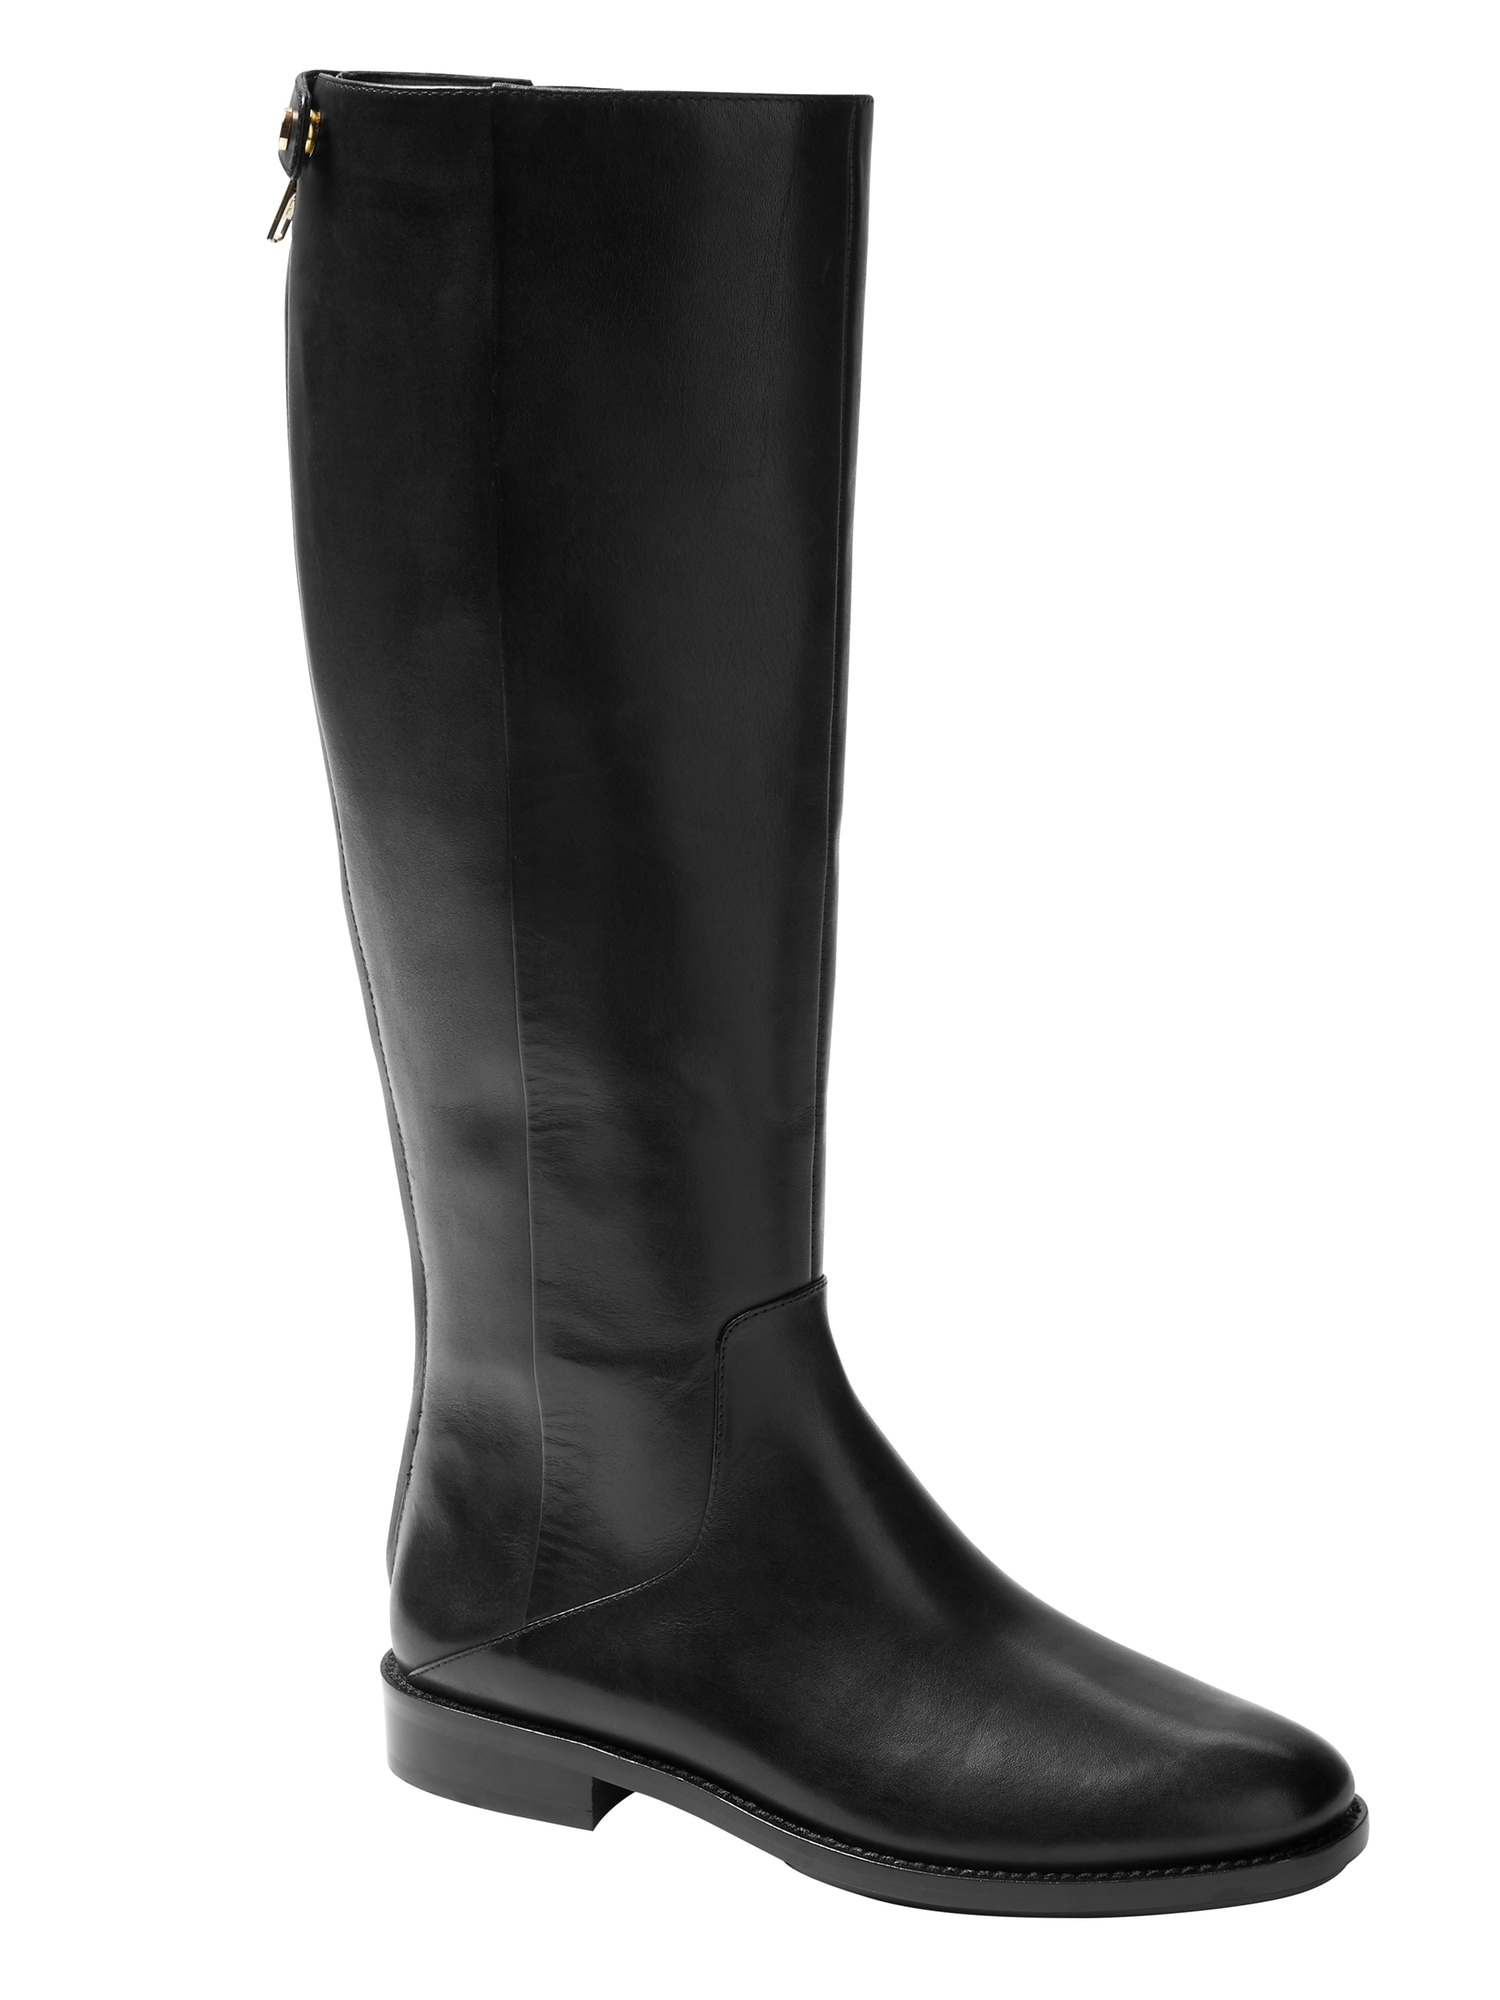 Riding Boot with Full Zip